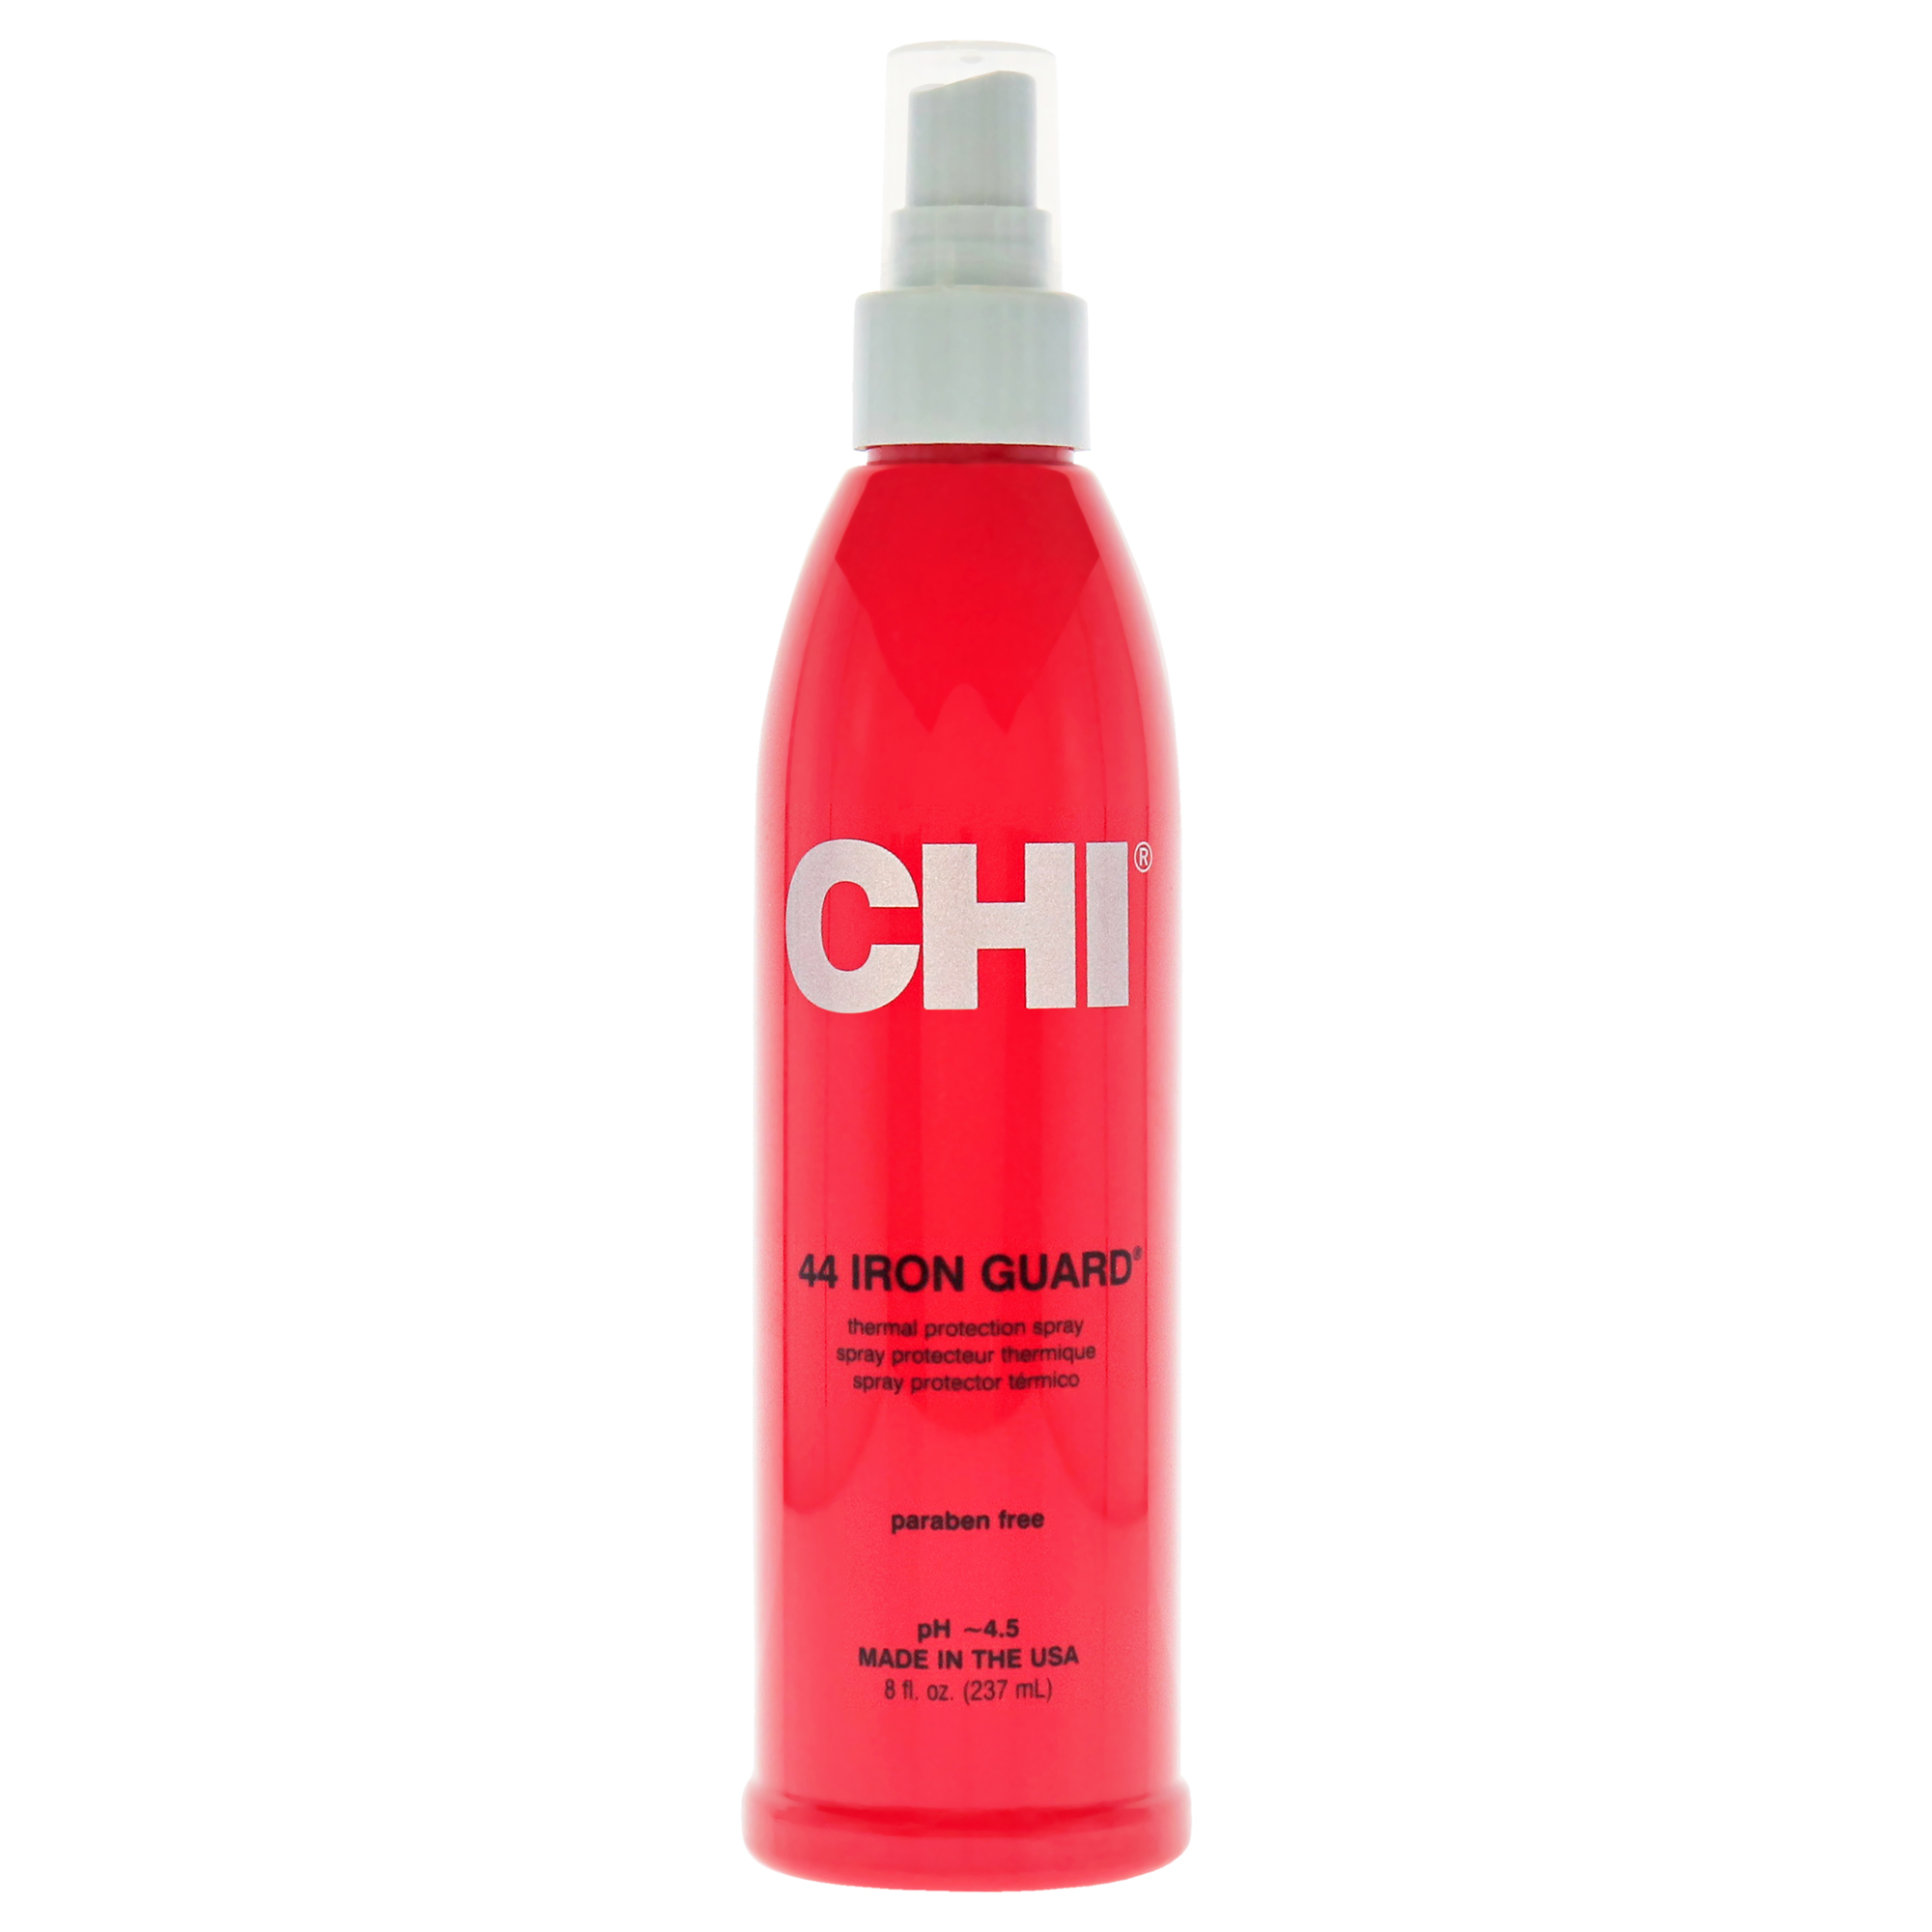 CHI 44 Iron Guard Thermal Protection Spray 8 oz - image 1 of 8